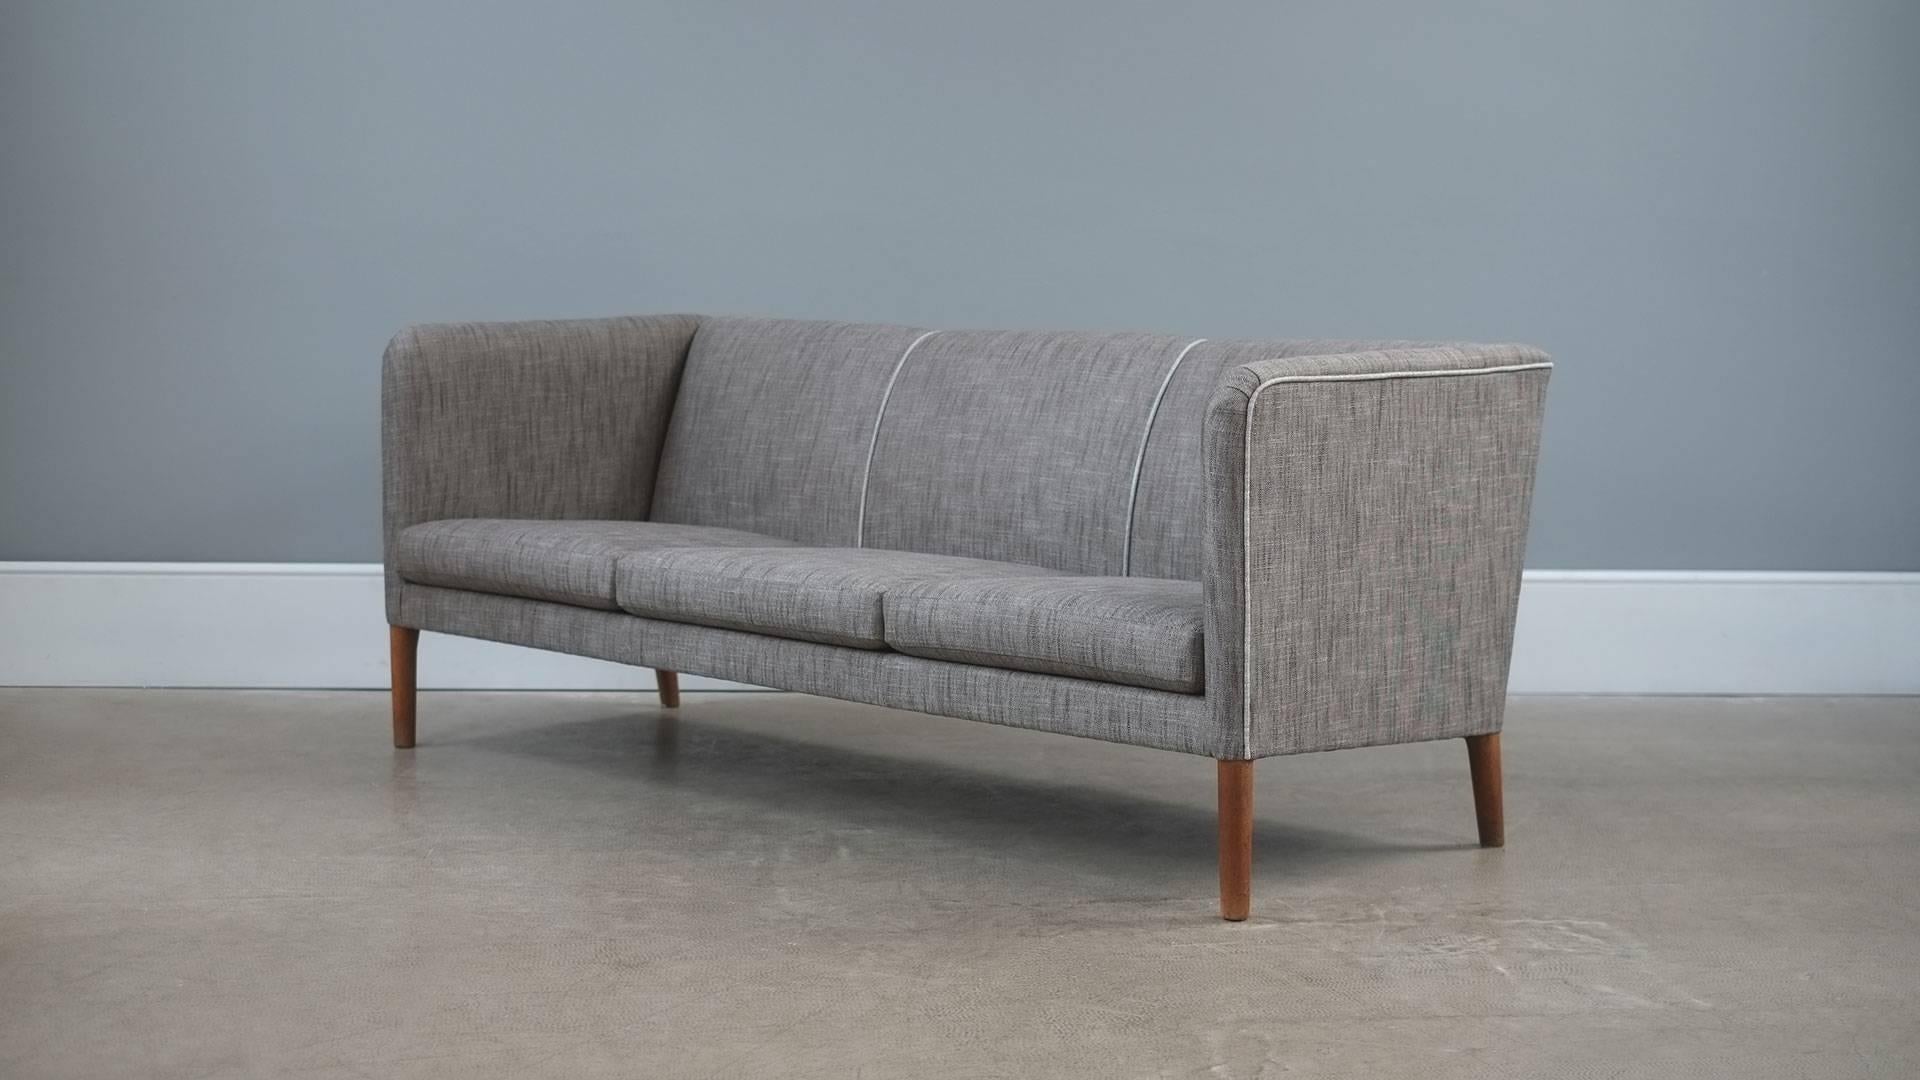 Ultra elegant Even Arm sofa designed by Hans Wegner for cabinet maker AP Stolen, Denmark. Very comfortable sofa fully reconditioned and reupholstered in fabulous grey fabric with contrasting piping details. Great piece.
 